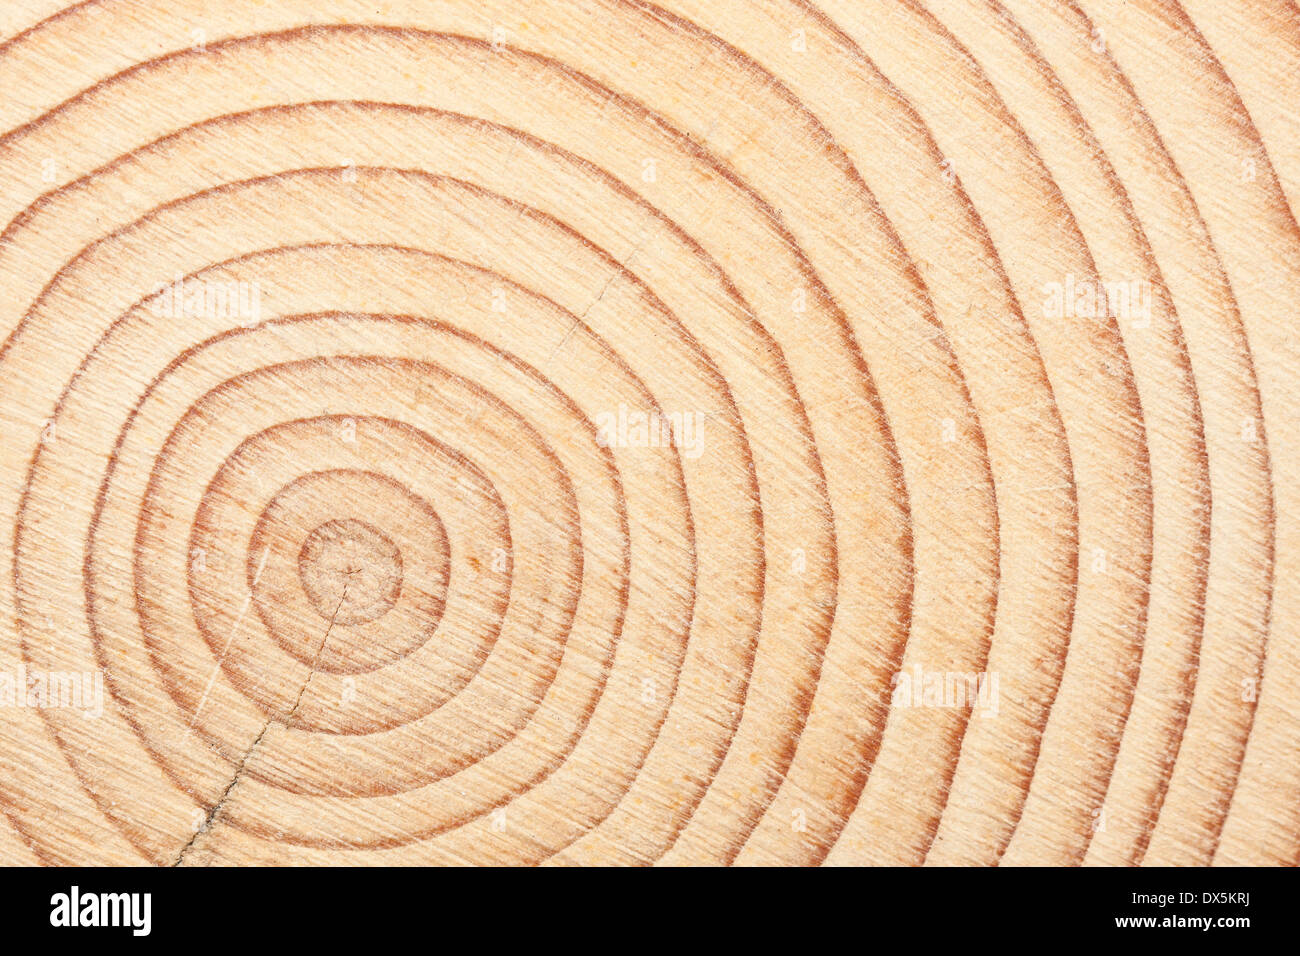 Circles of a timber beam when cross cut Stock Photo